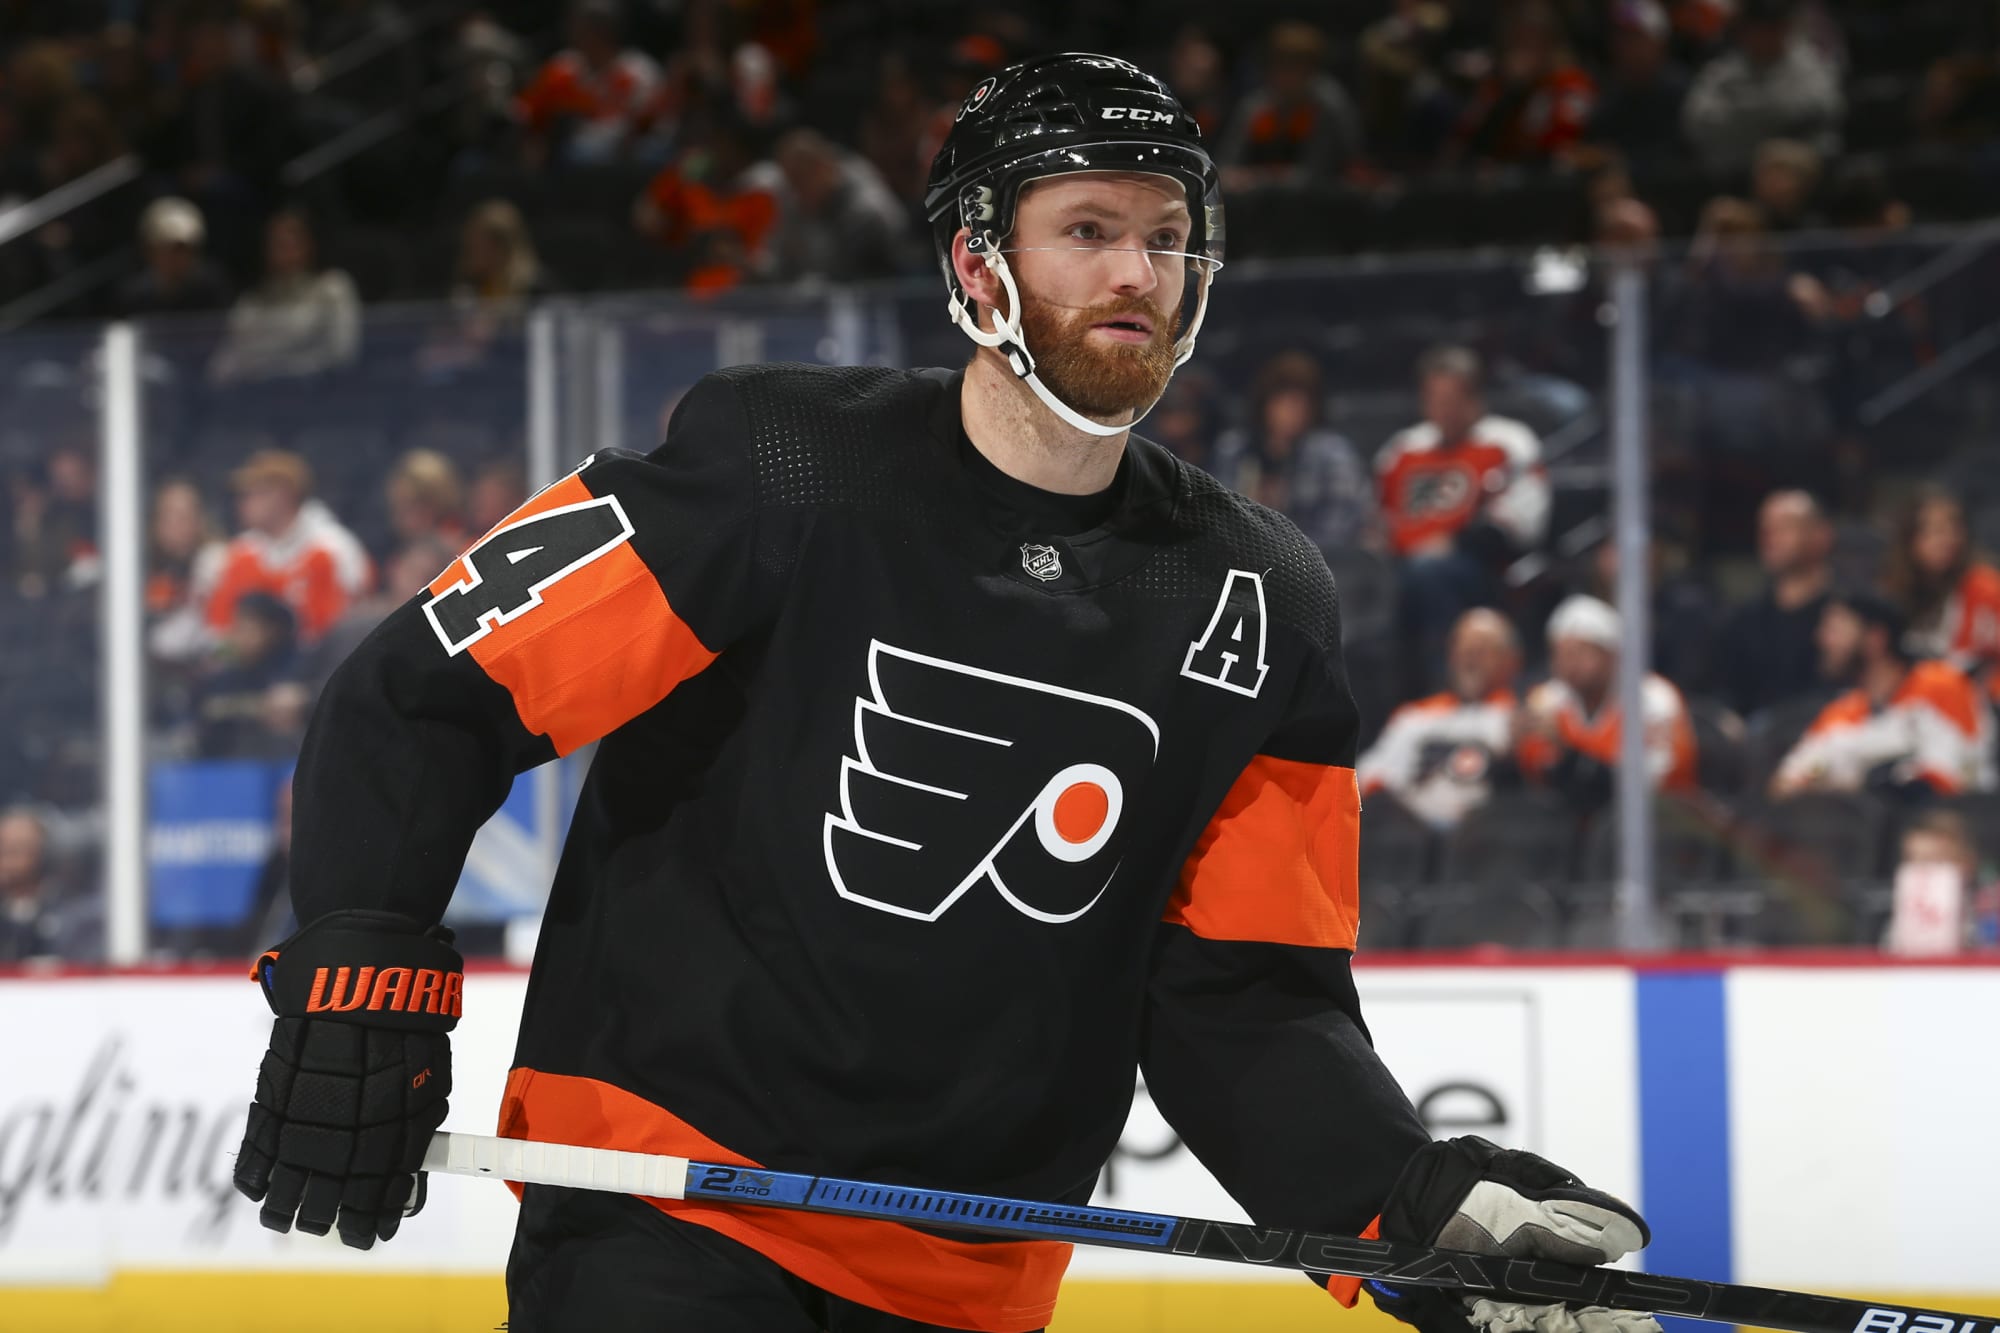 Sean Couturier scores on penalty shot in Flyers' 2-0 victory over